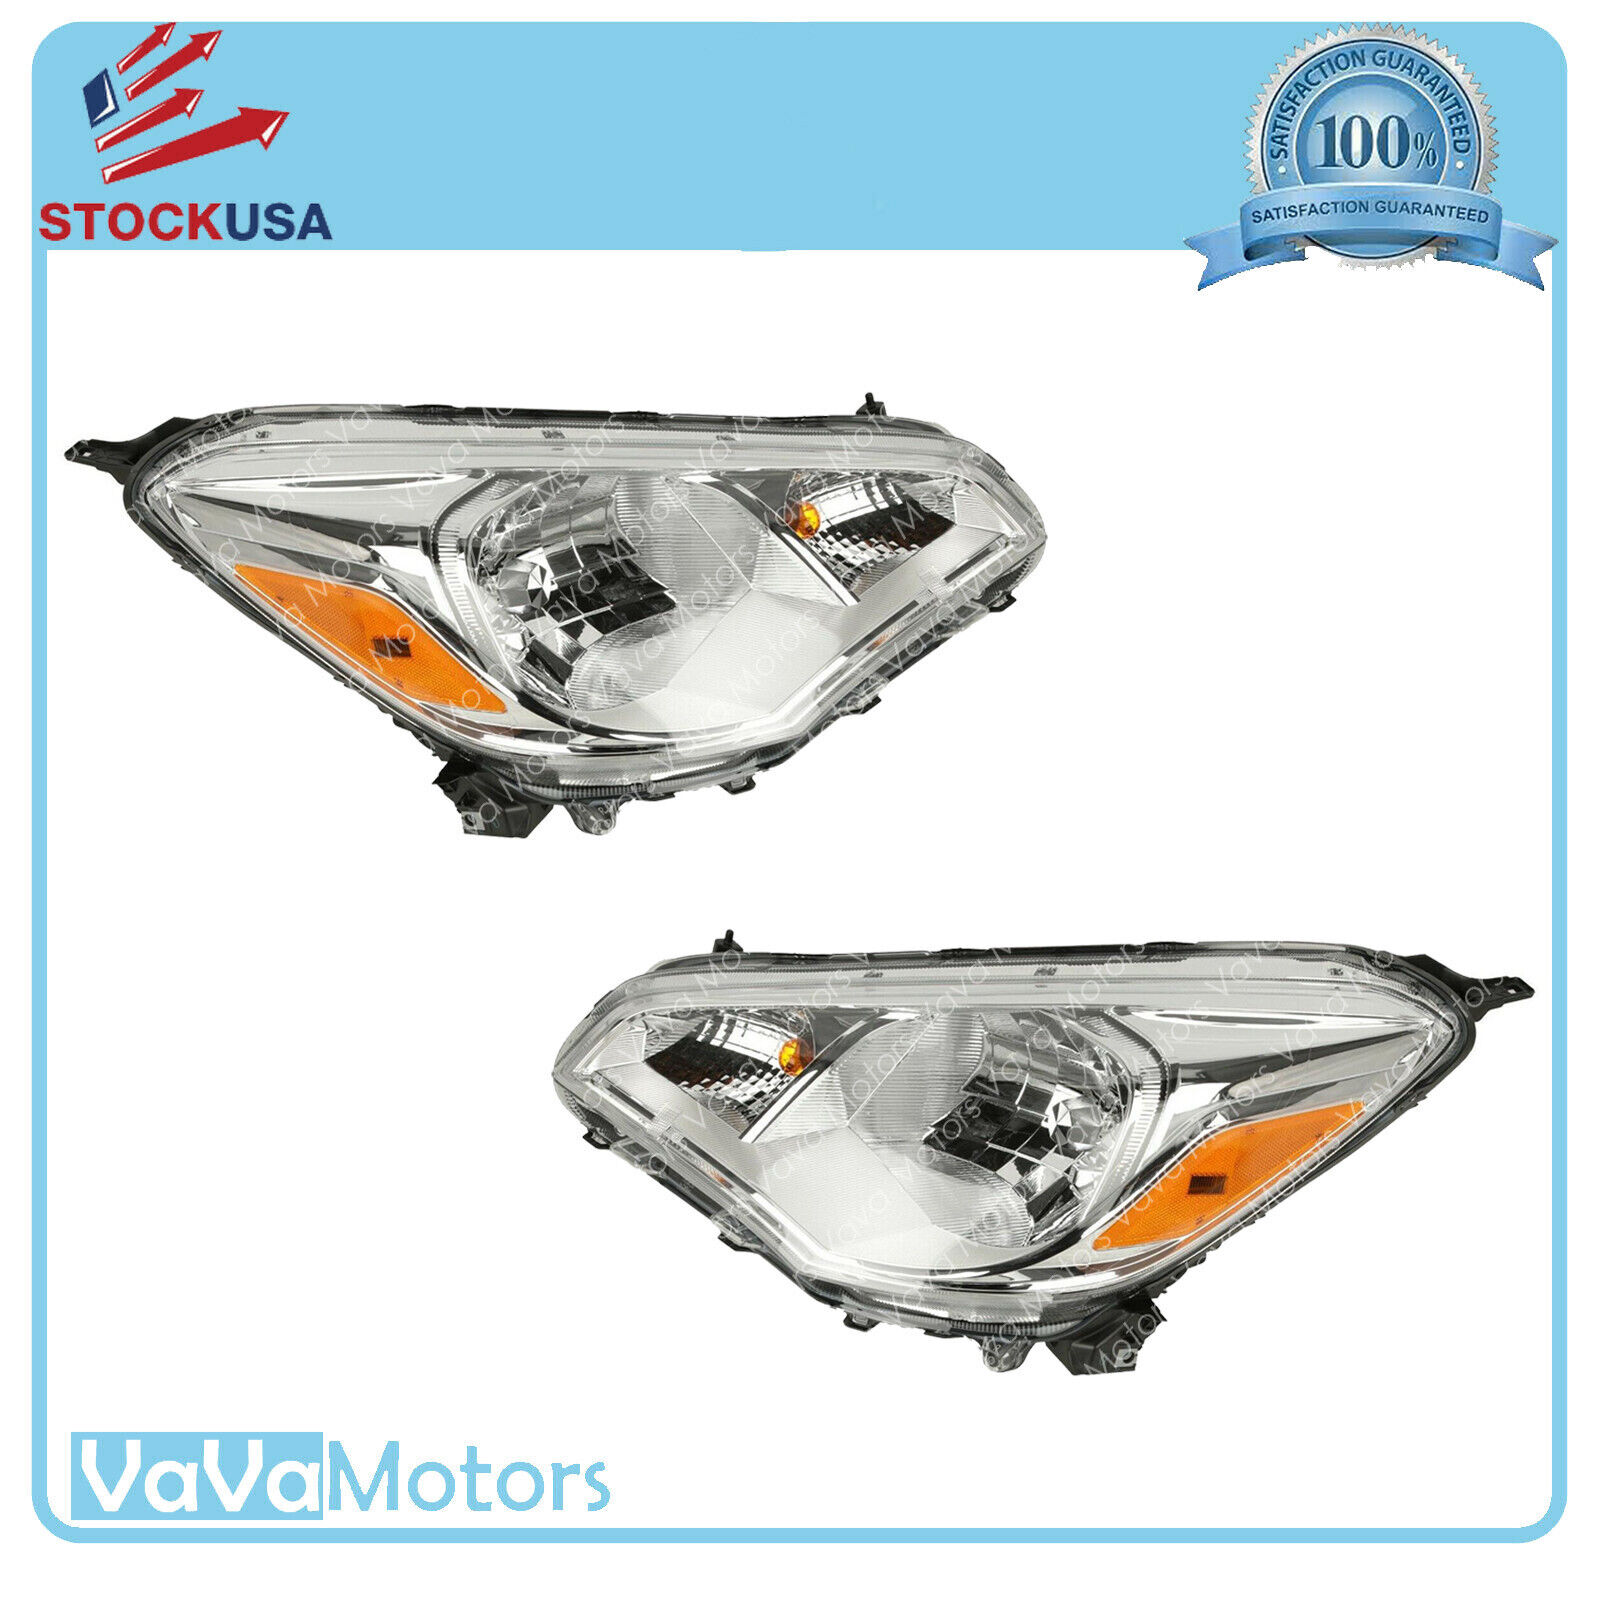 Fits 2017 2018 2019 2020 Mitsubishi Mirage G4 Headlight Assembly Left Right Pair